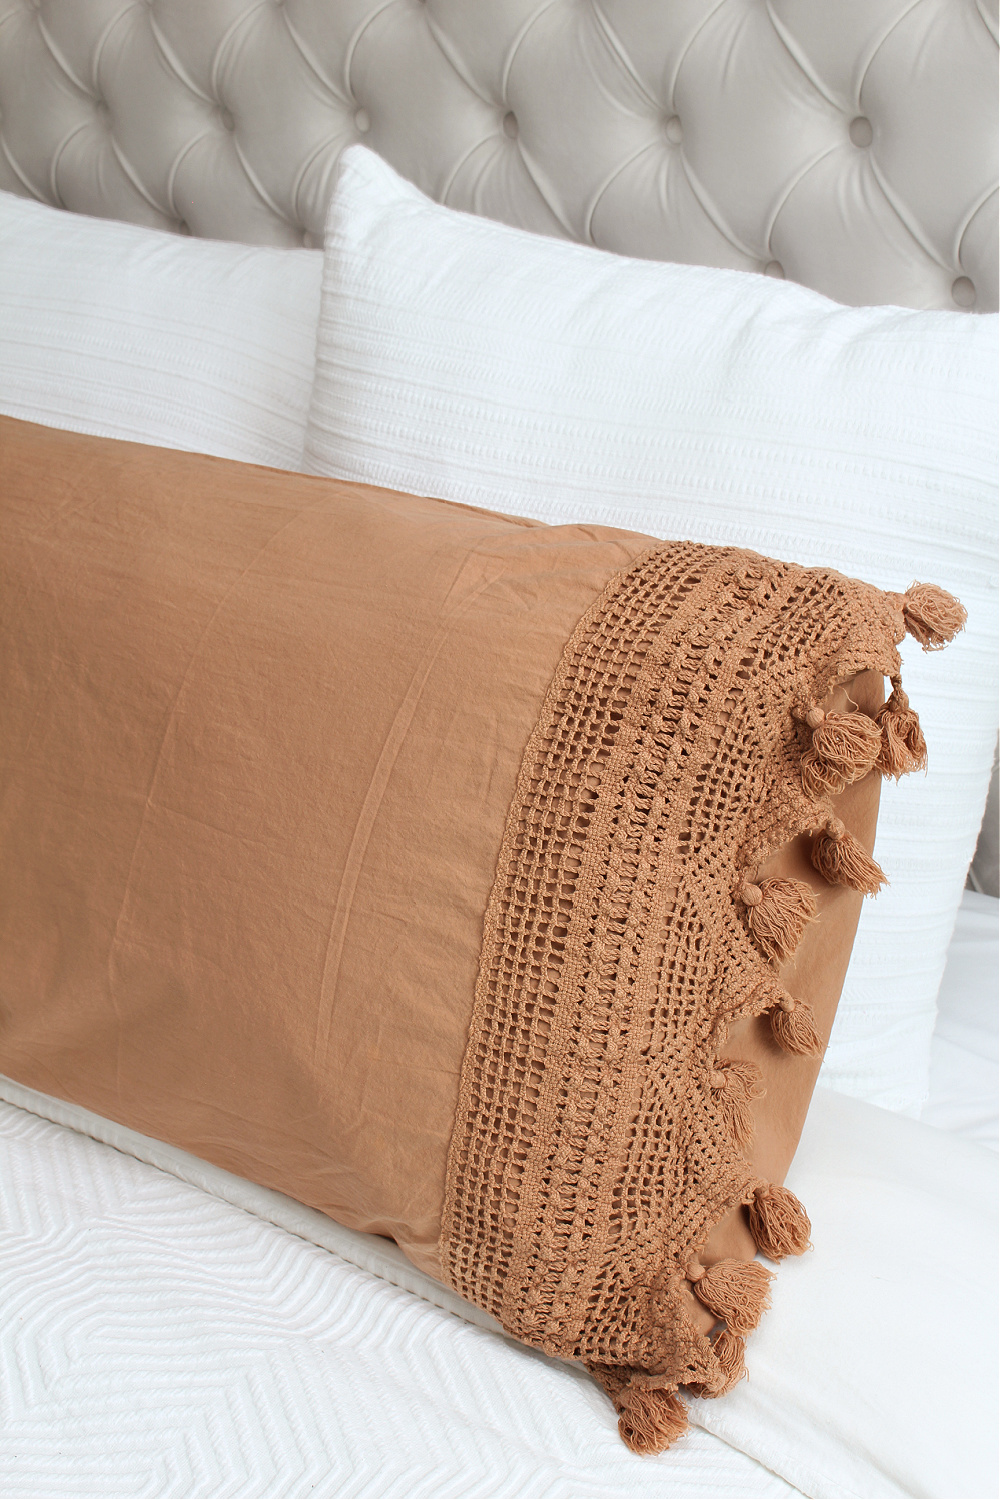 Decorative fall pillows on a bed with white bedding.